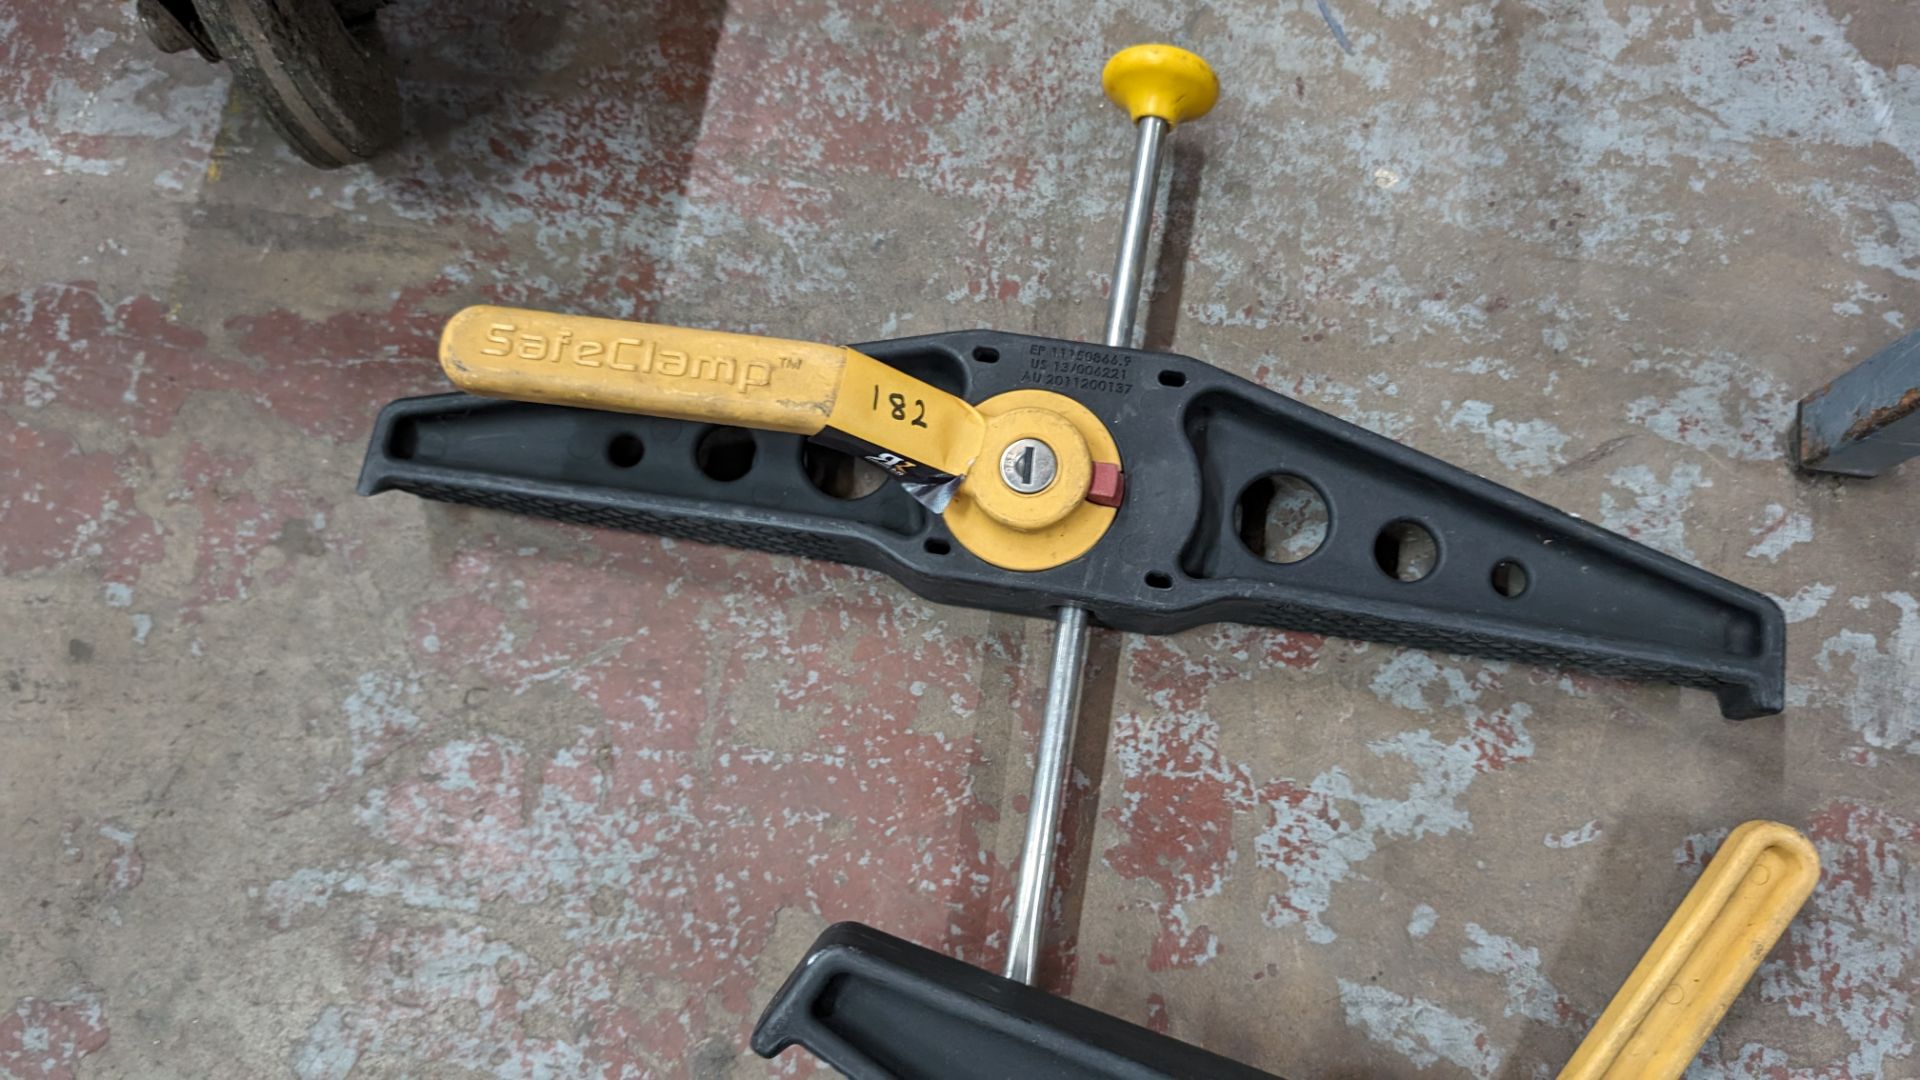 Pair of Rhino safe clamps for use with ladders - Image 4 of 5